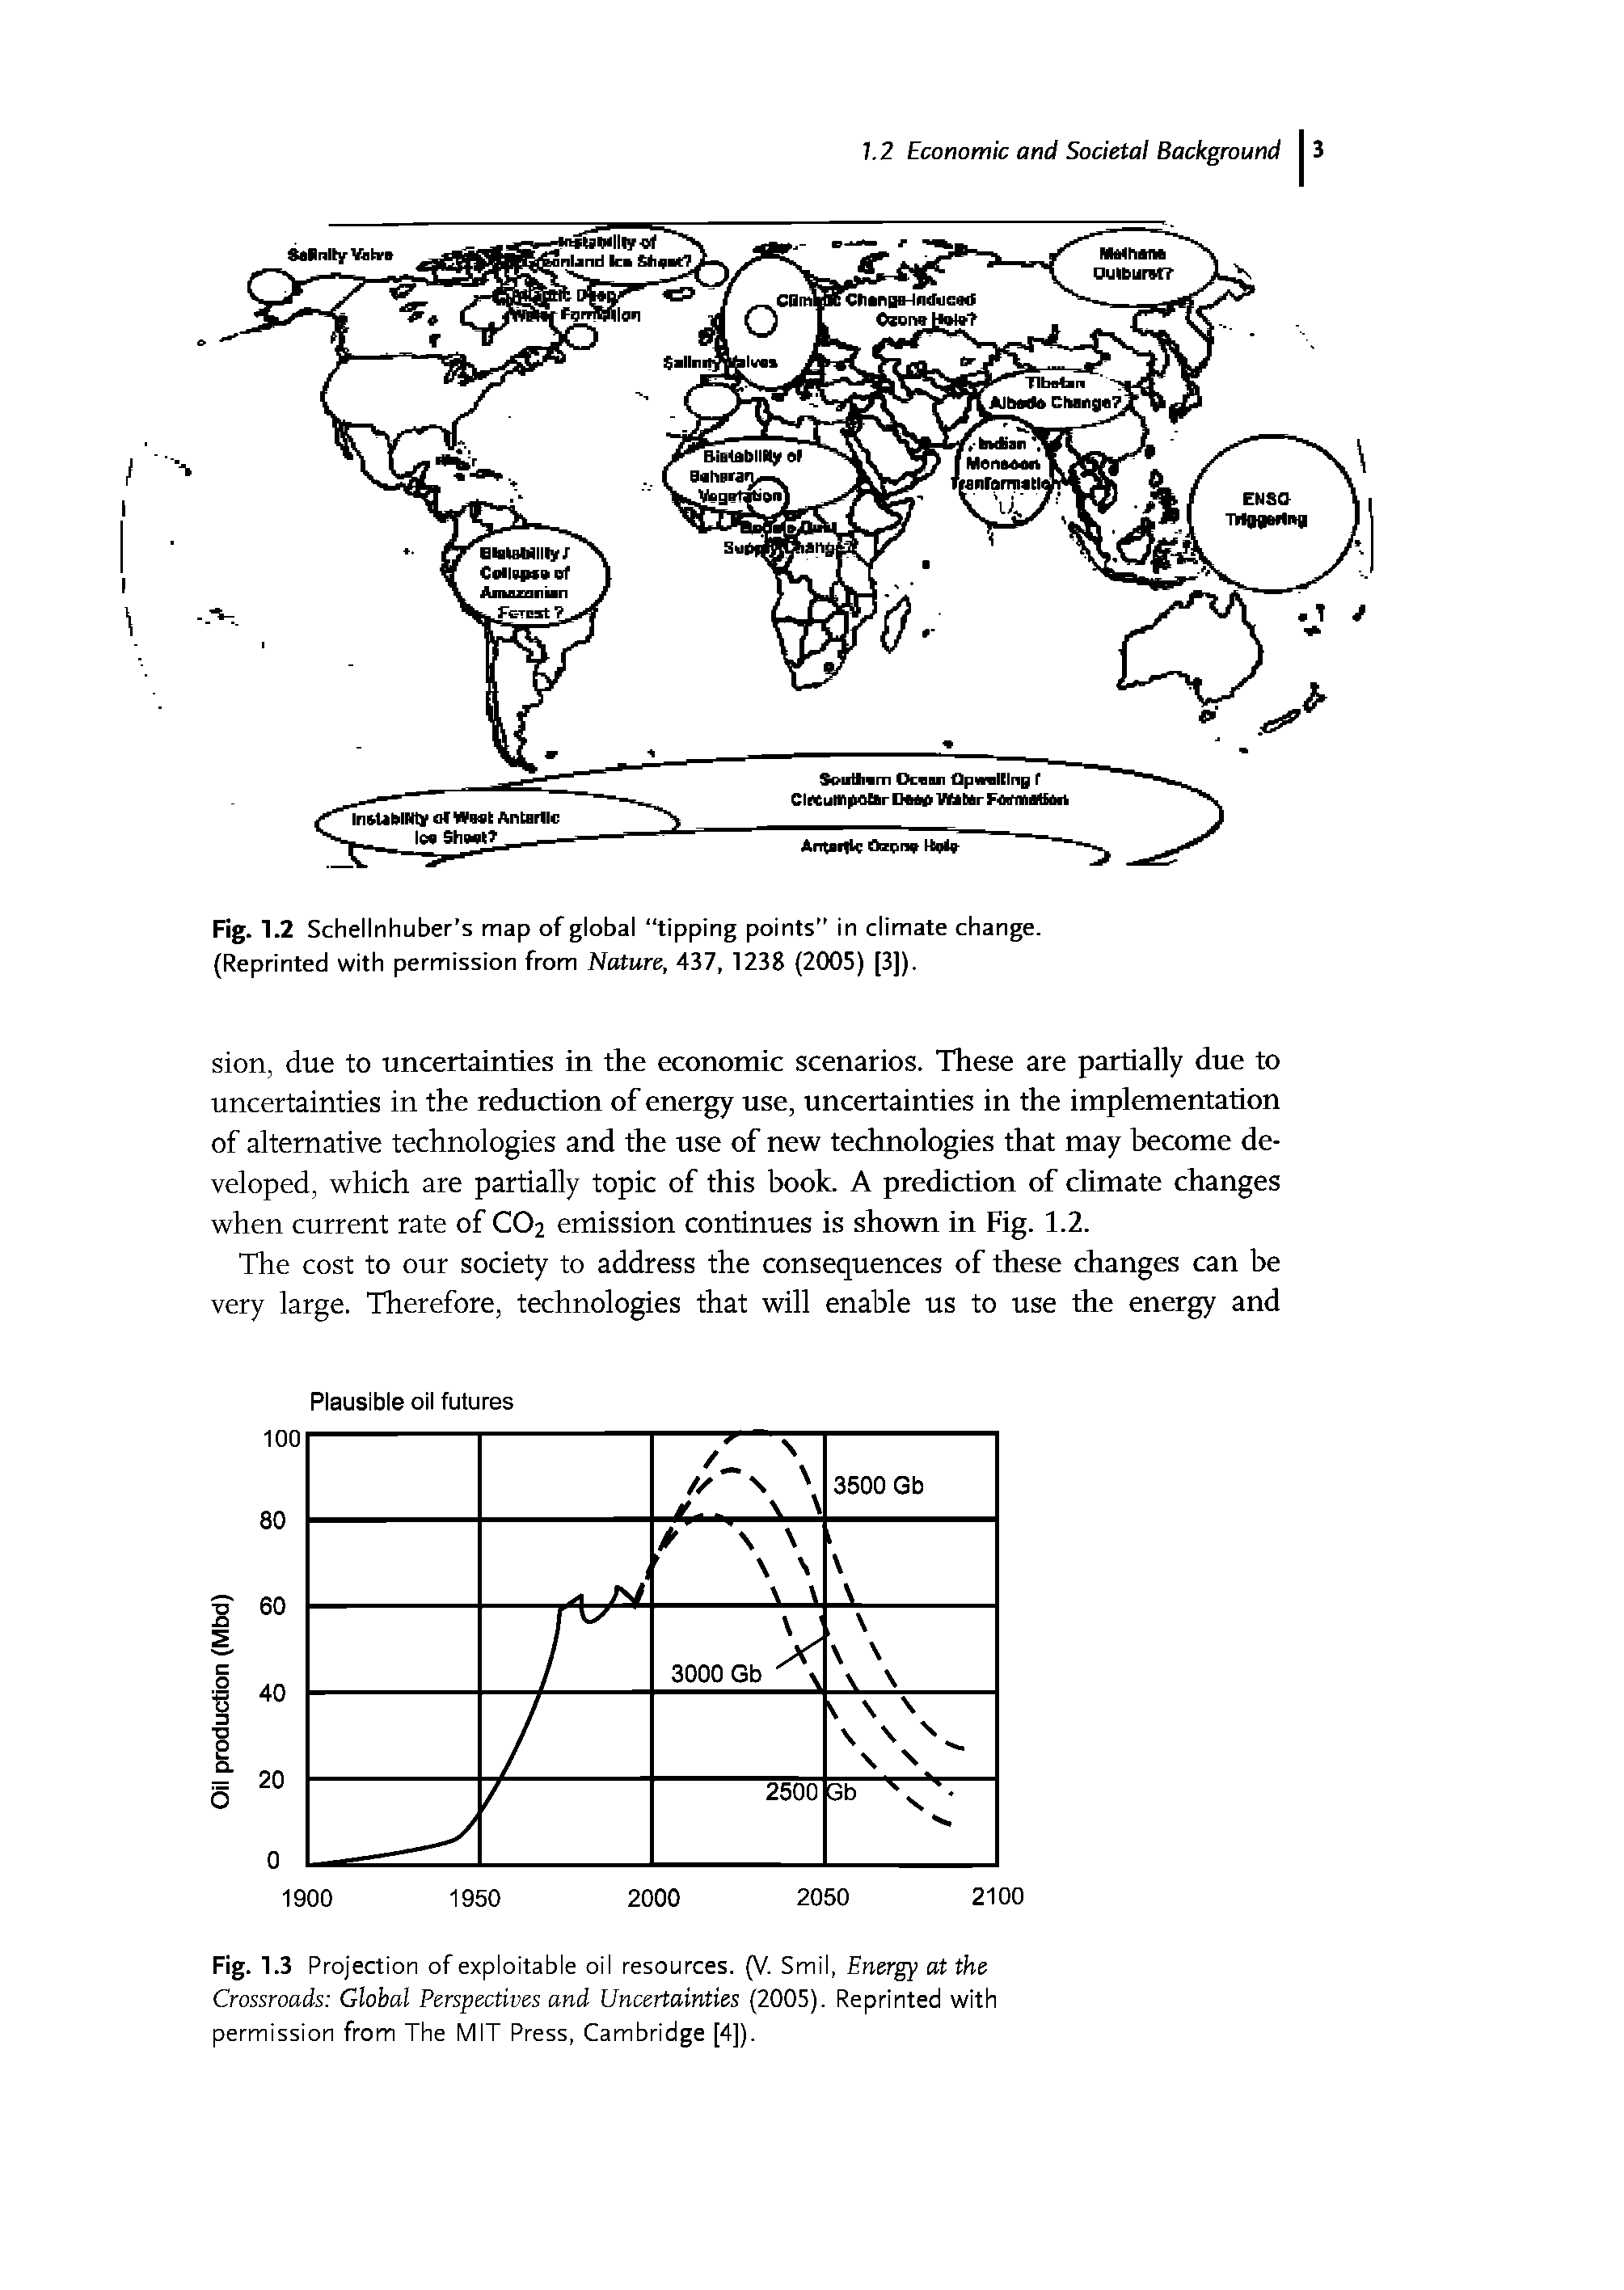 Fig. 1.3 Projection of exploitable oil resources. (V. Smil, Energy at the Crossroads Global Perspectives and Uncertainties (2005). Reprinted with permission from The MIT Press, Cambridge [4]).